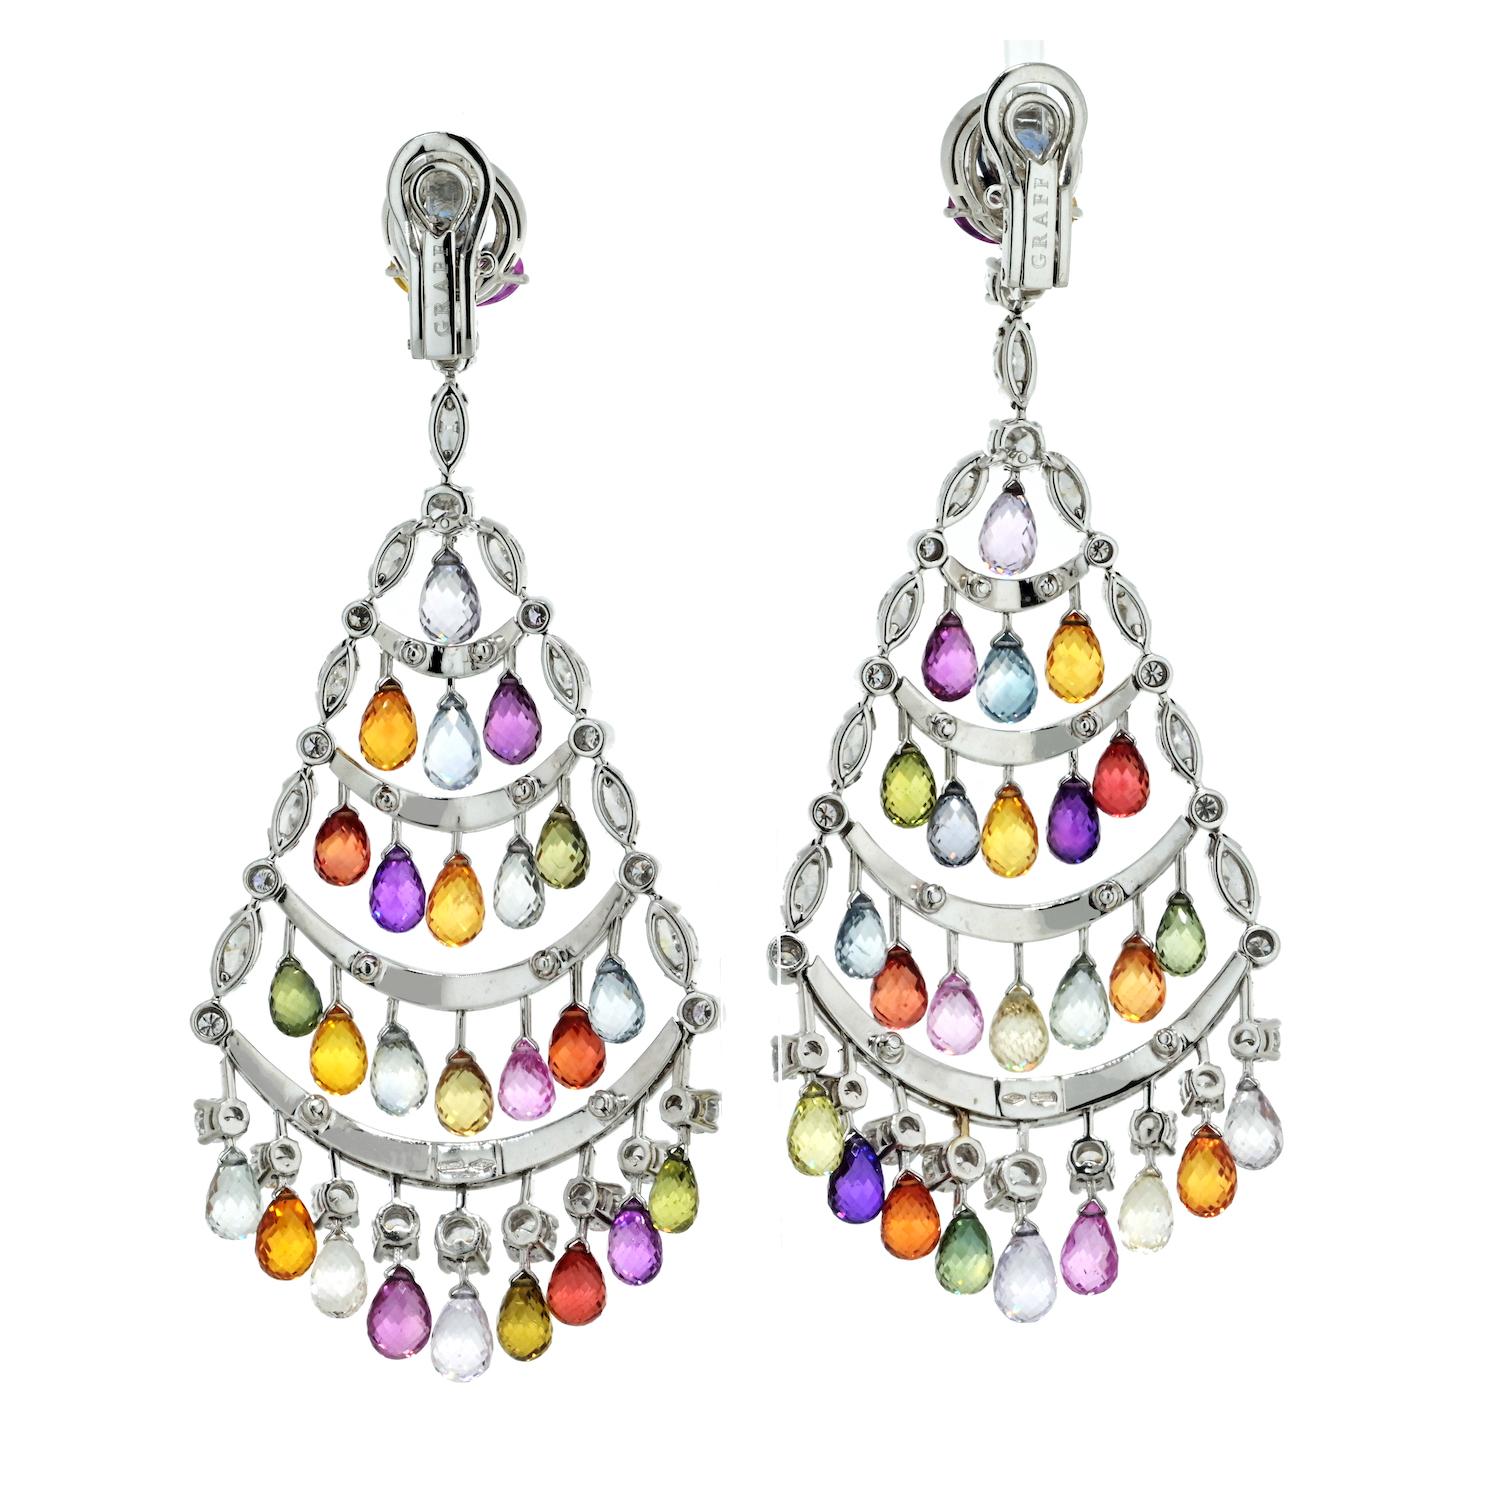 Experience unparalleled luxury with our Graff 18K White Gold Multicolor Sapphire & Diamond Chandelier Earrings. Crafted to perfection, these exquisite earrings are a symphony of color and brilliance, showcasing meticulous detailing and Graff's